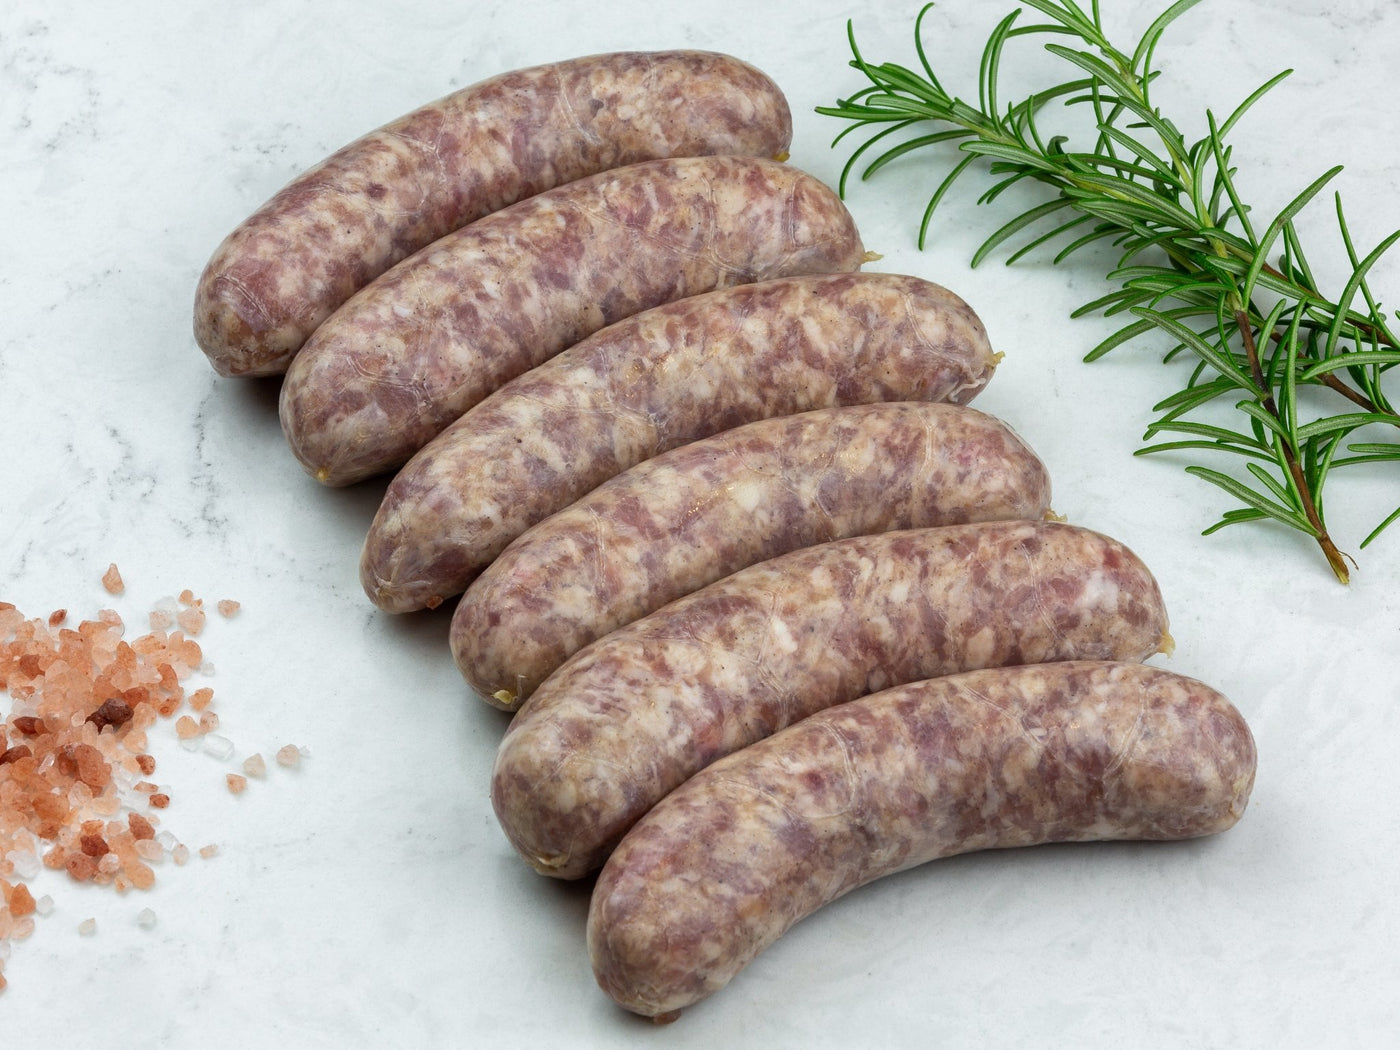 The Traditional Pork Sausage - Gluten Free - Pork - Thomas Joseph Butchery - Ethical Dry-Aged Meat The Best Steak UK Thomas Joseph Butchery